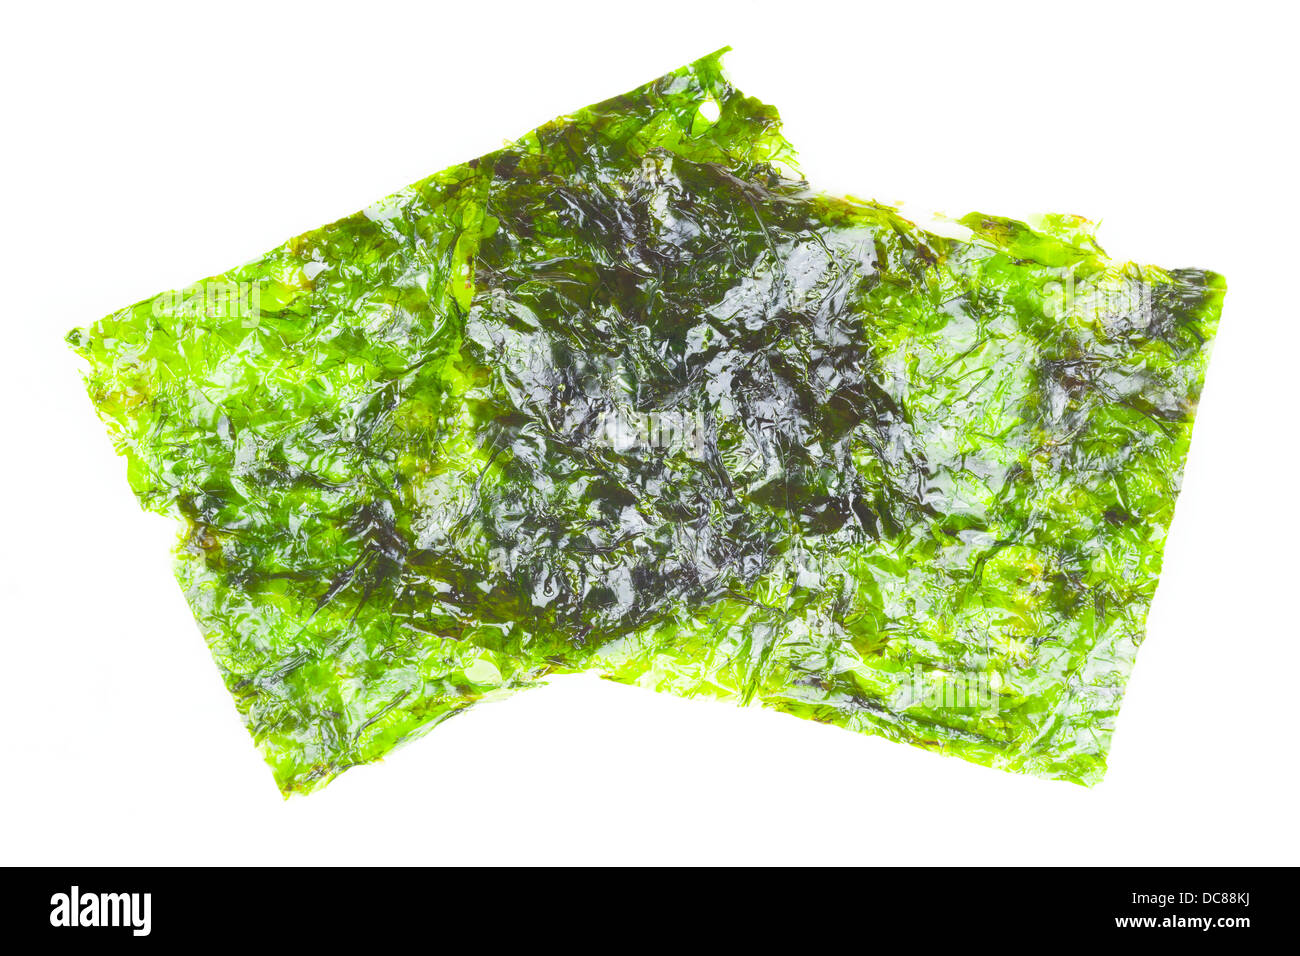 Ulva lactuca, seaweed or laver, on a white background Stock Photo